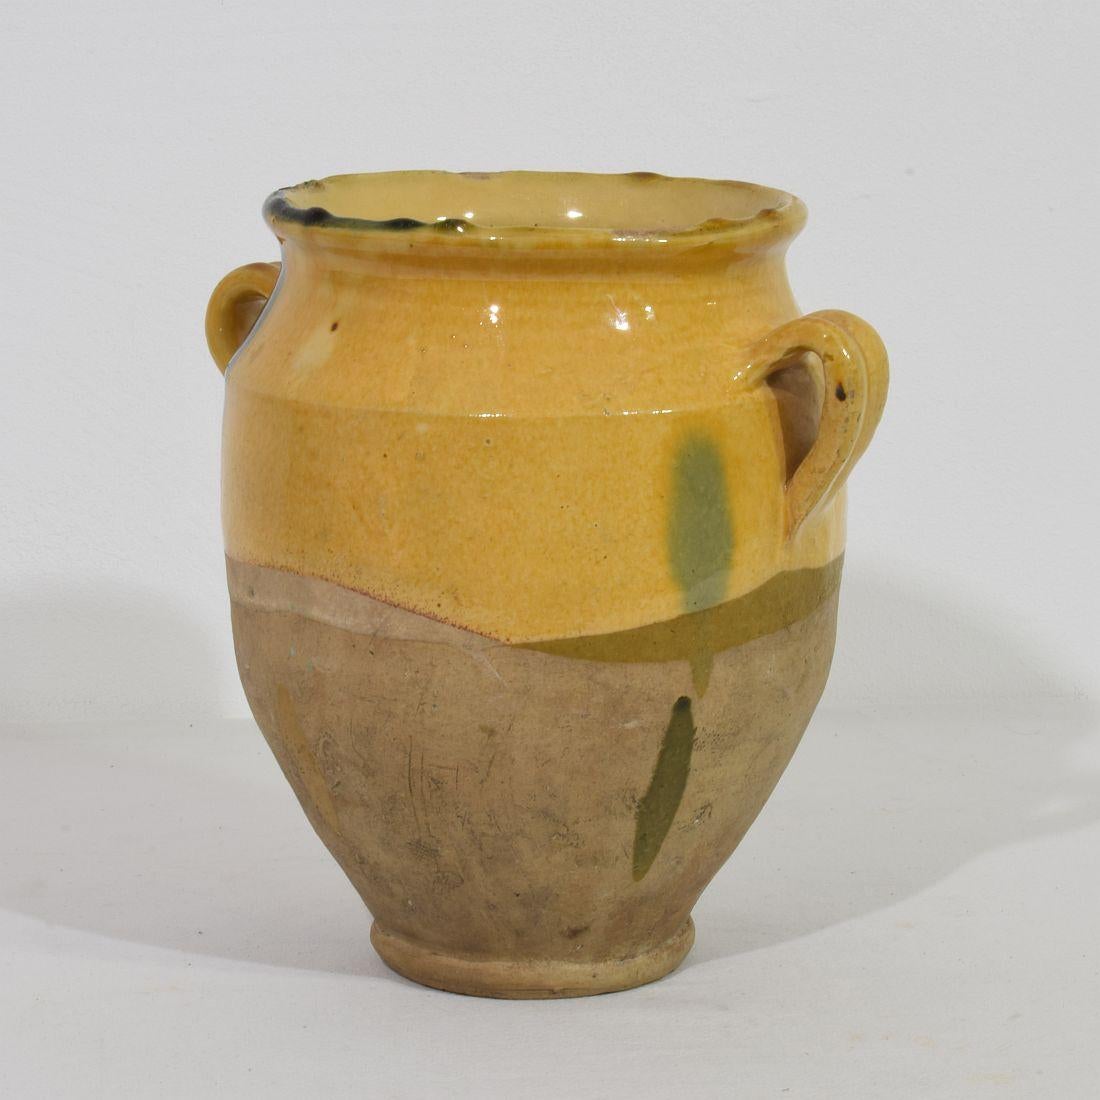 Beautiful confit jar with its characteristic yellow glaze. What makes this item so unique is the beautiful green/blue stripe.
Confit jars were used primarily in the South of France for the preservation of meats such as duck or goose for dishes such